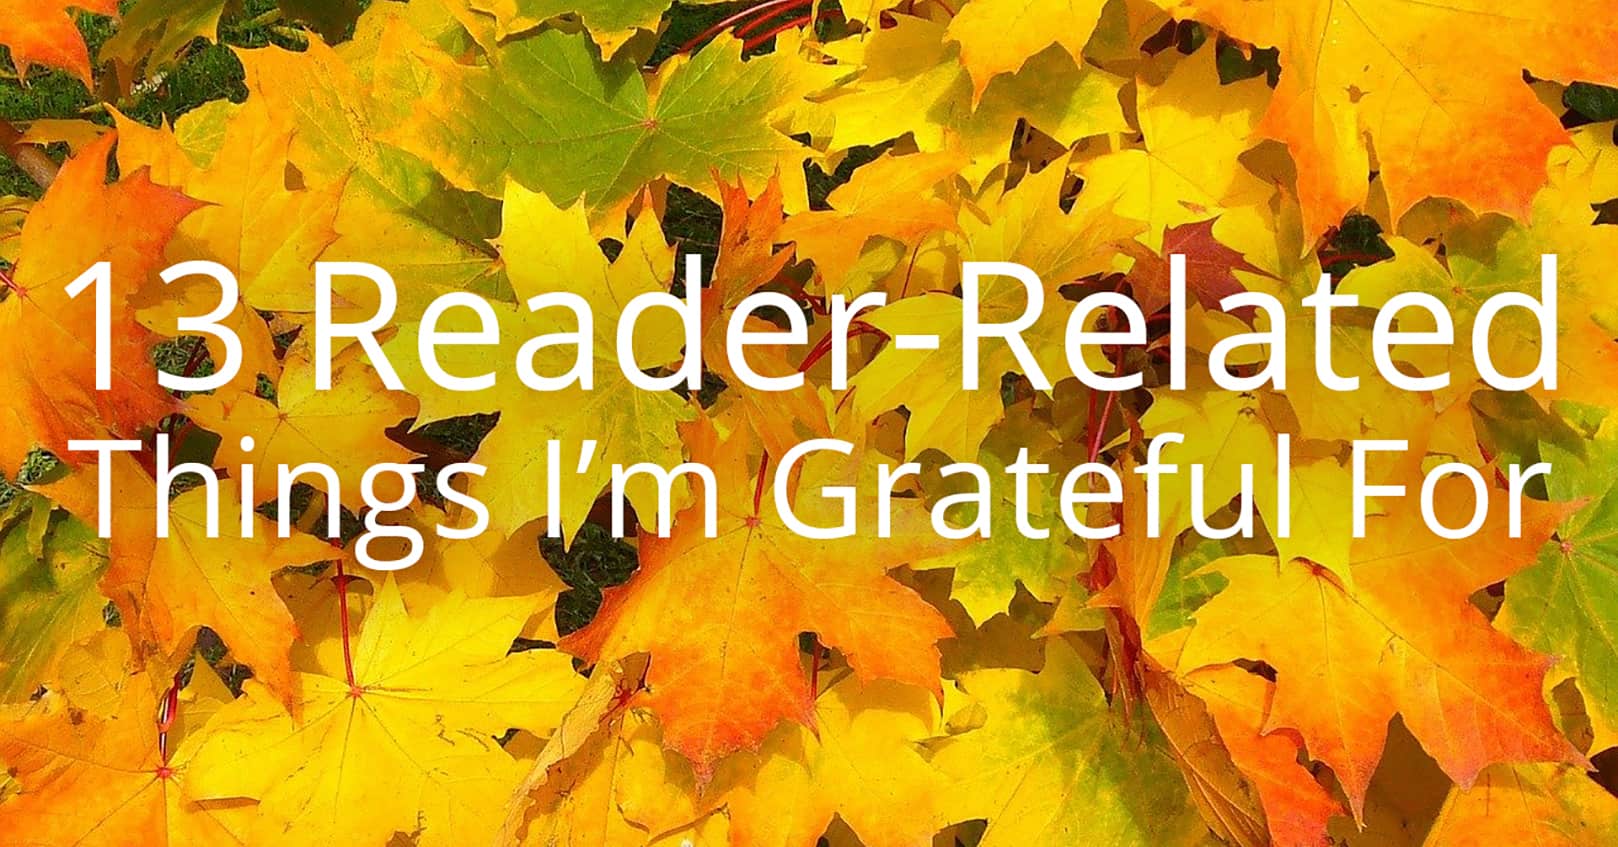 reader-related things Im grateful for